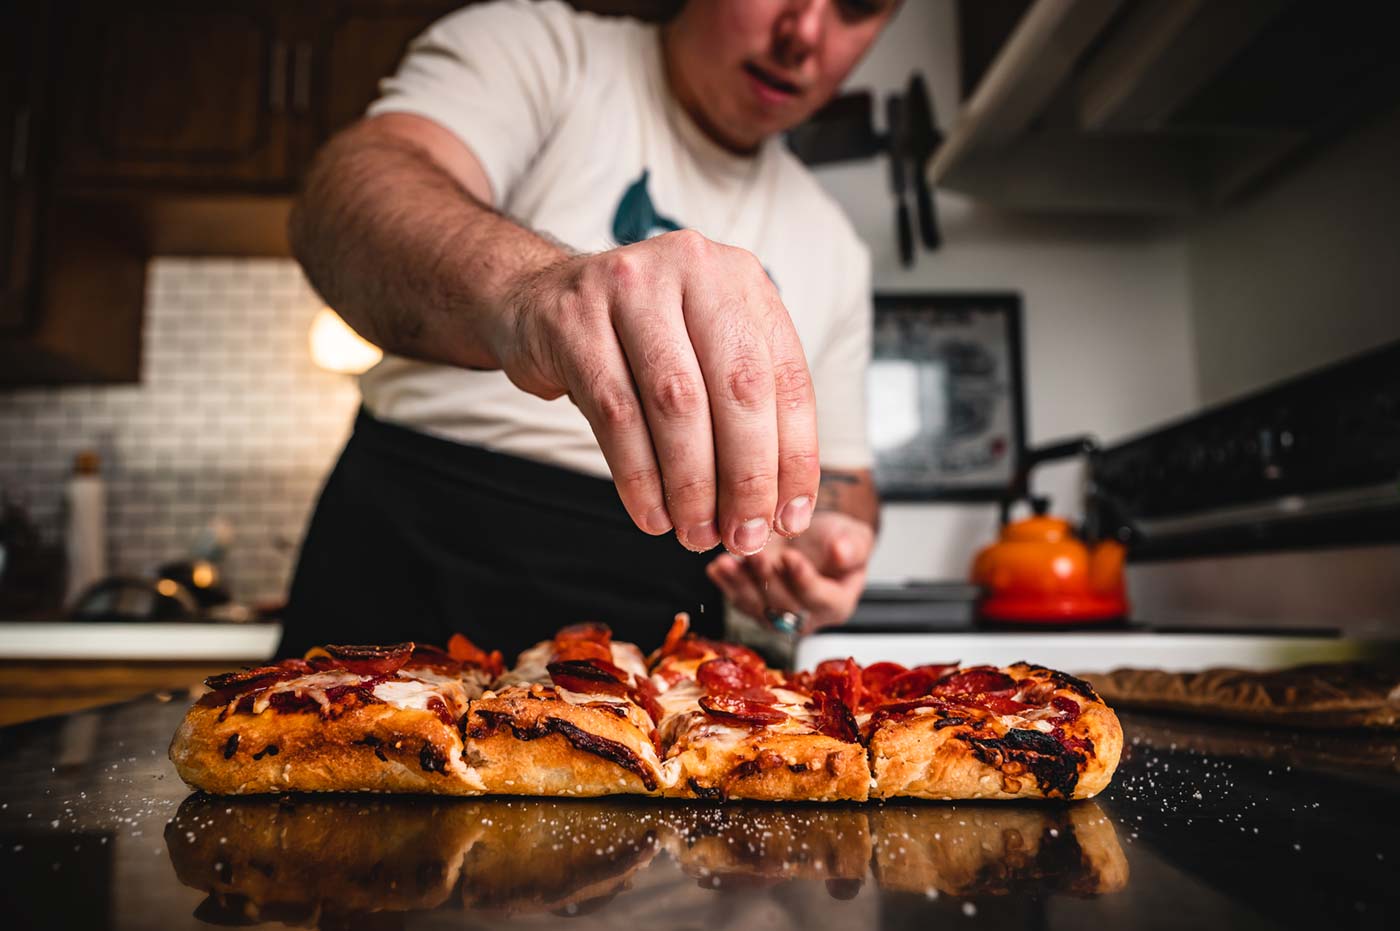 The Wizard of Za adds final touches to one of his signature hand-made pizzas.